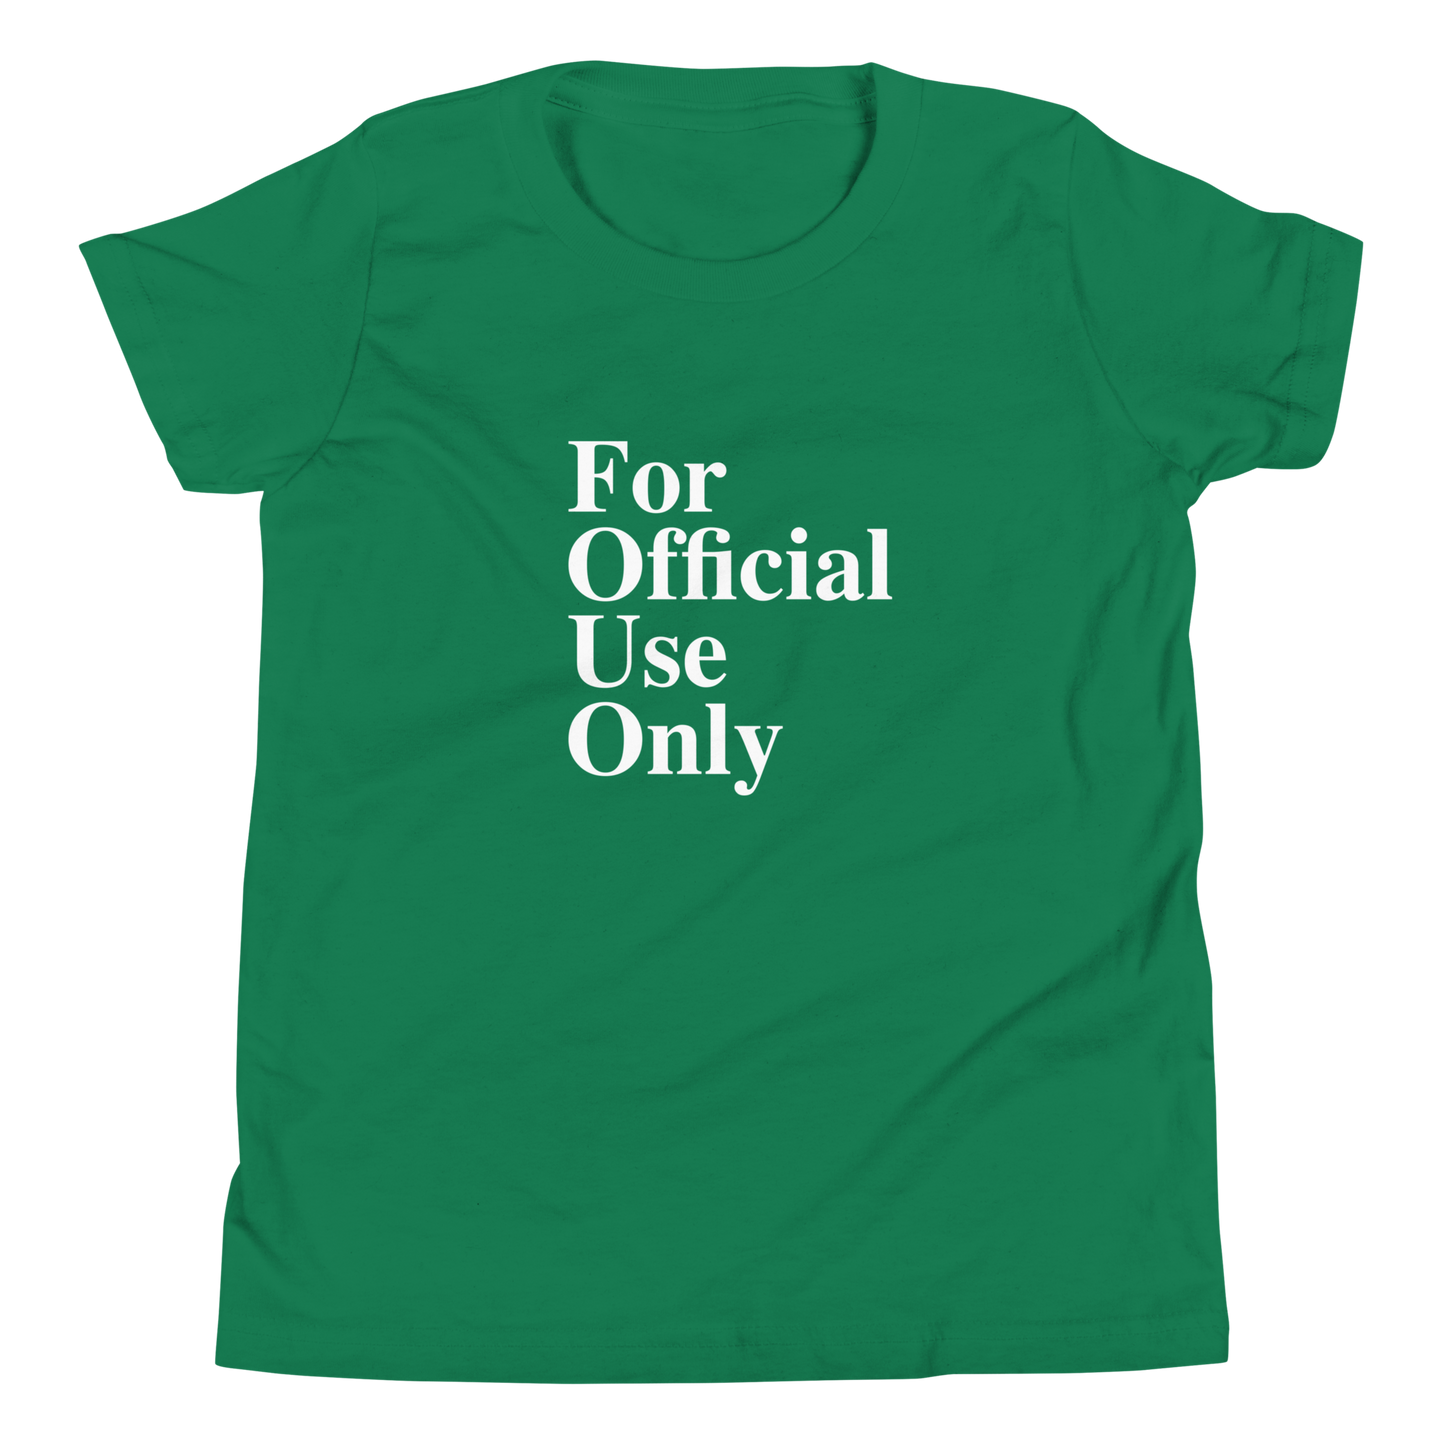 Kids For Official Use Only Youth T-Shirt